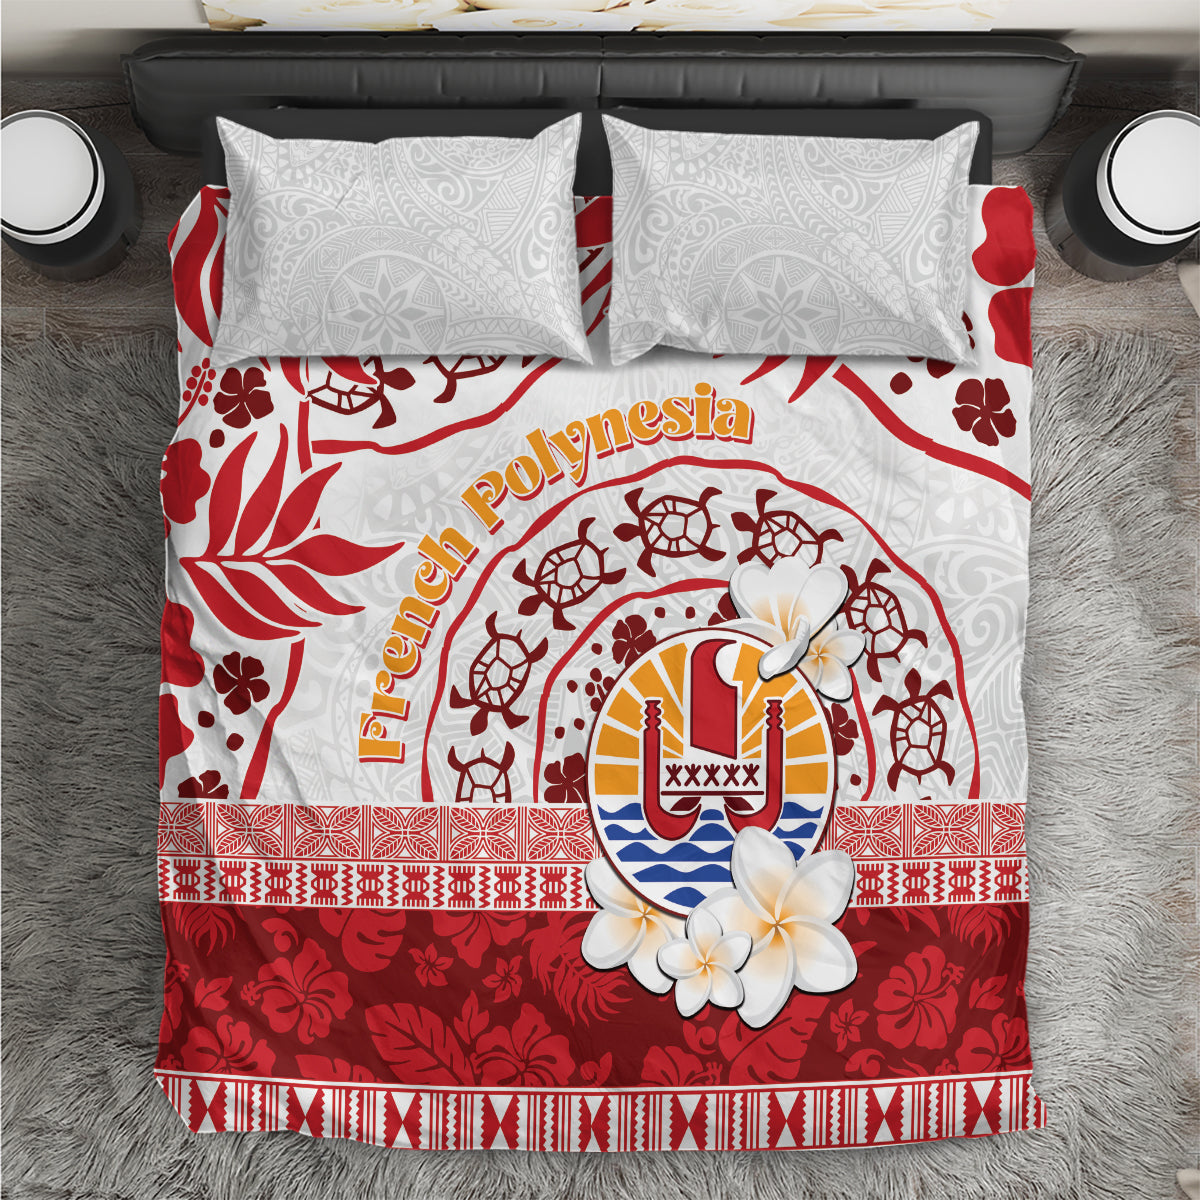 French Polynesia Internal Autonomy Day Bedding Set Tropical Hibiscus And Turtle Pattern